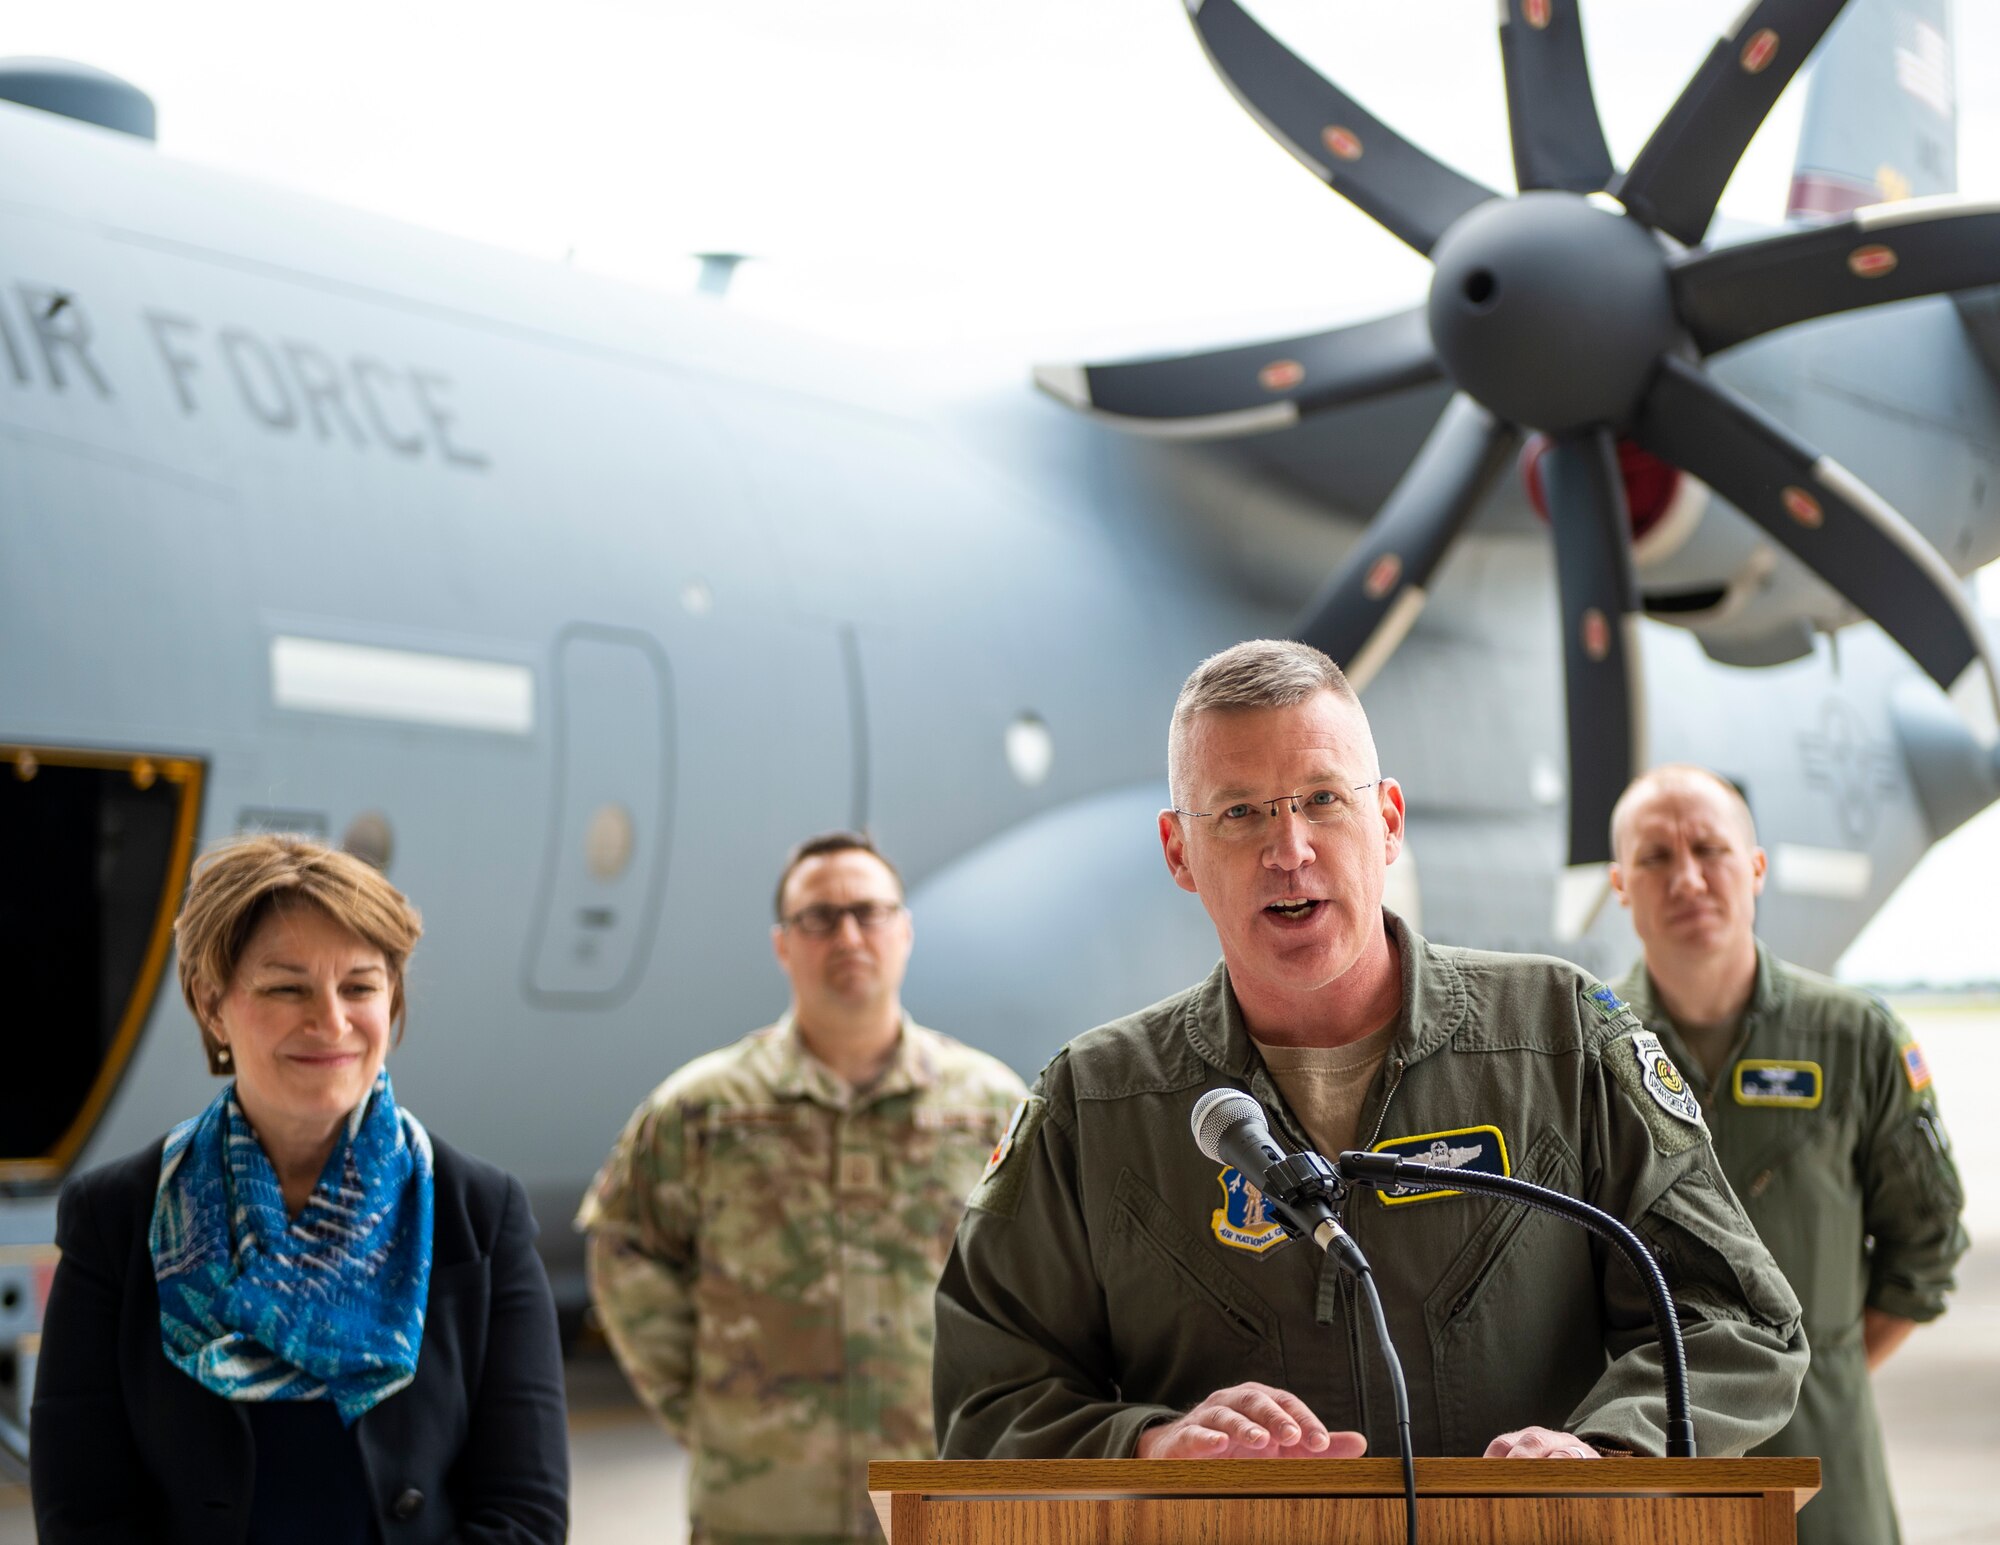 U.S. Air Force Col. James Cleet, commander, 133rd Airlift Wing, briefs the media at a press conference with U.S. Sen. Amy Klobuchar, D-Minn., in St. Paul, Minn., May 22, 2022.